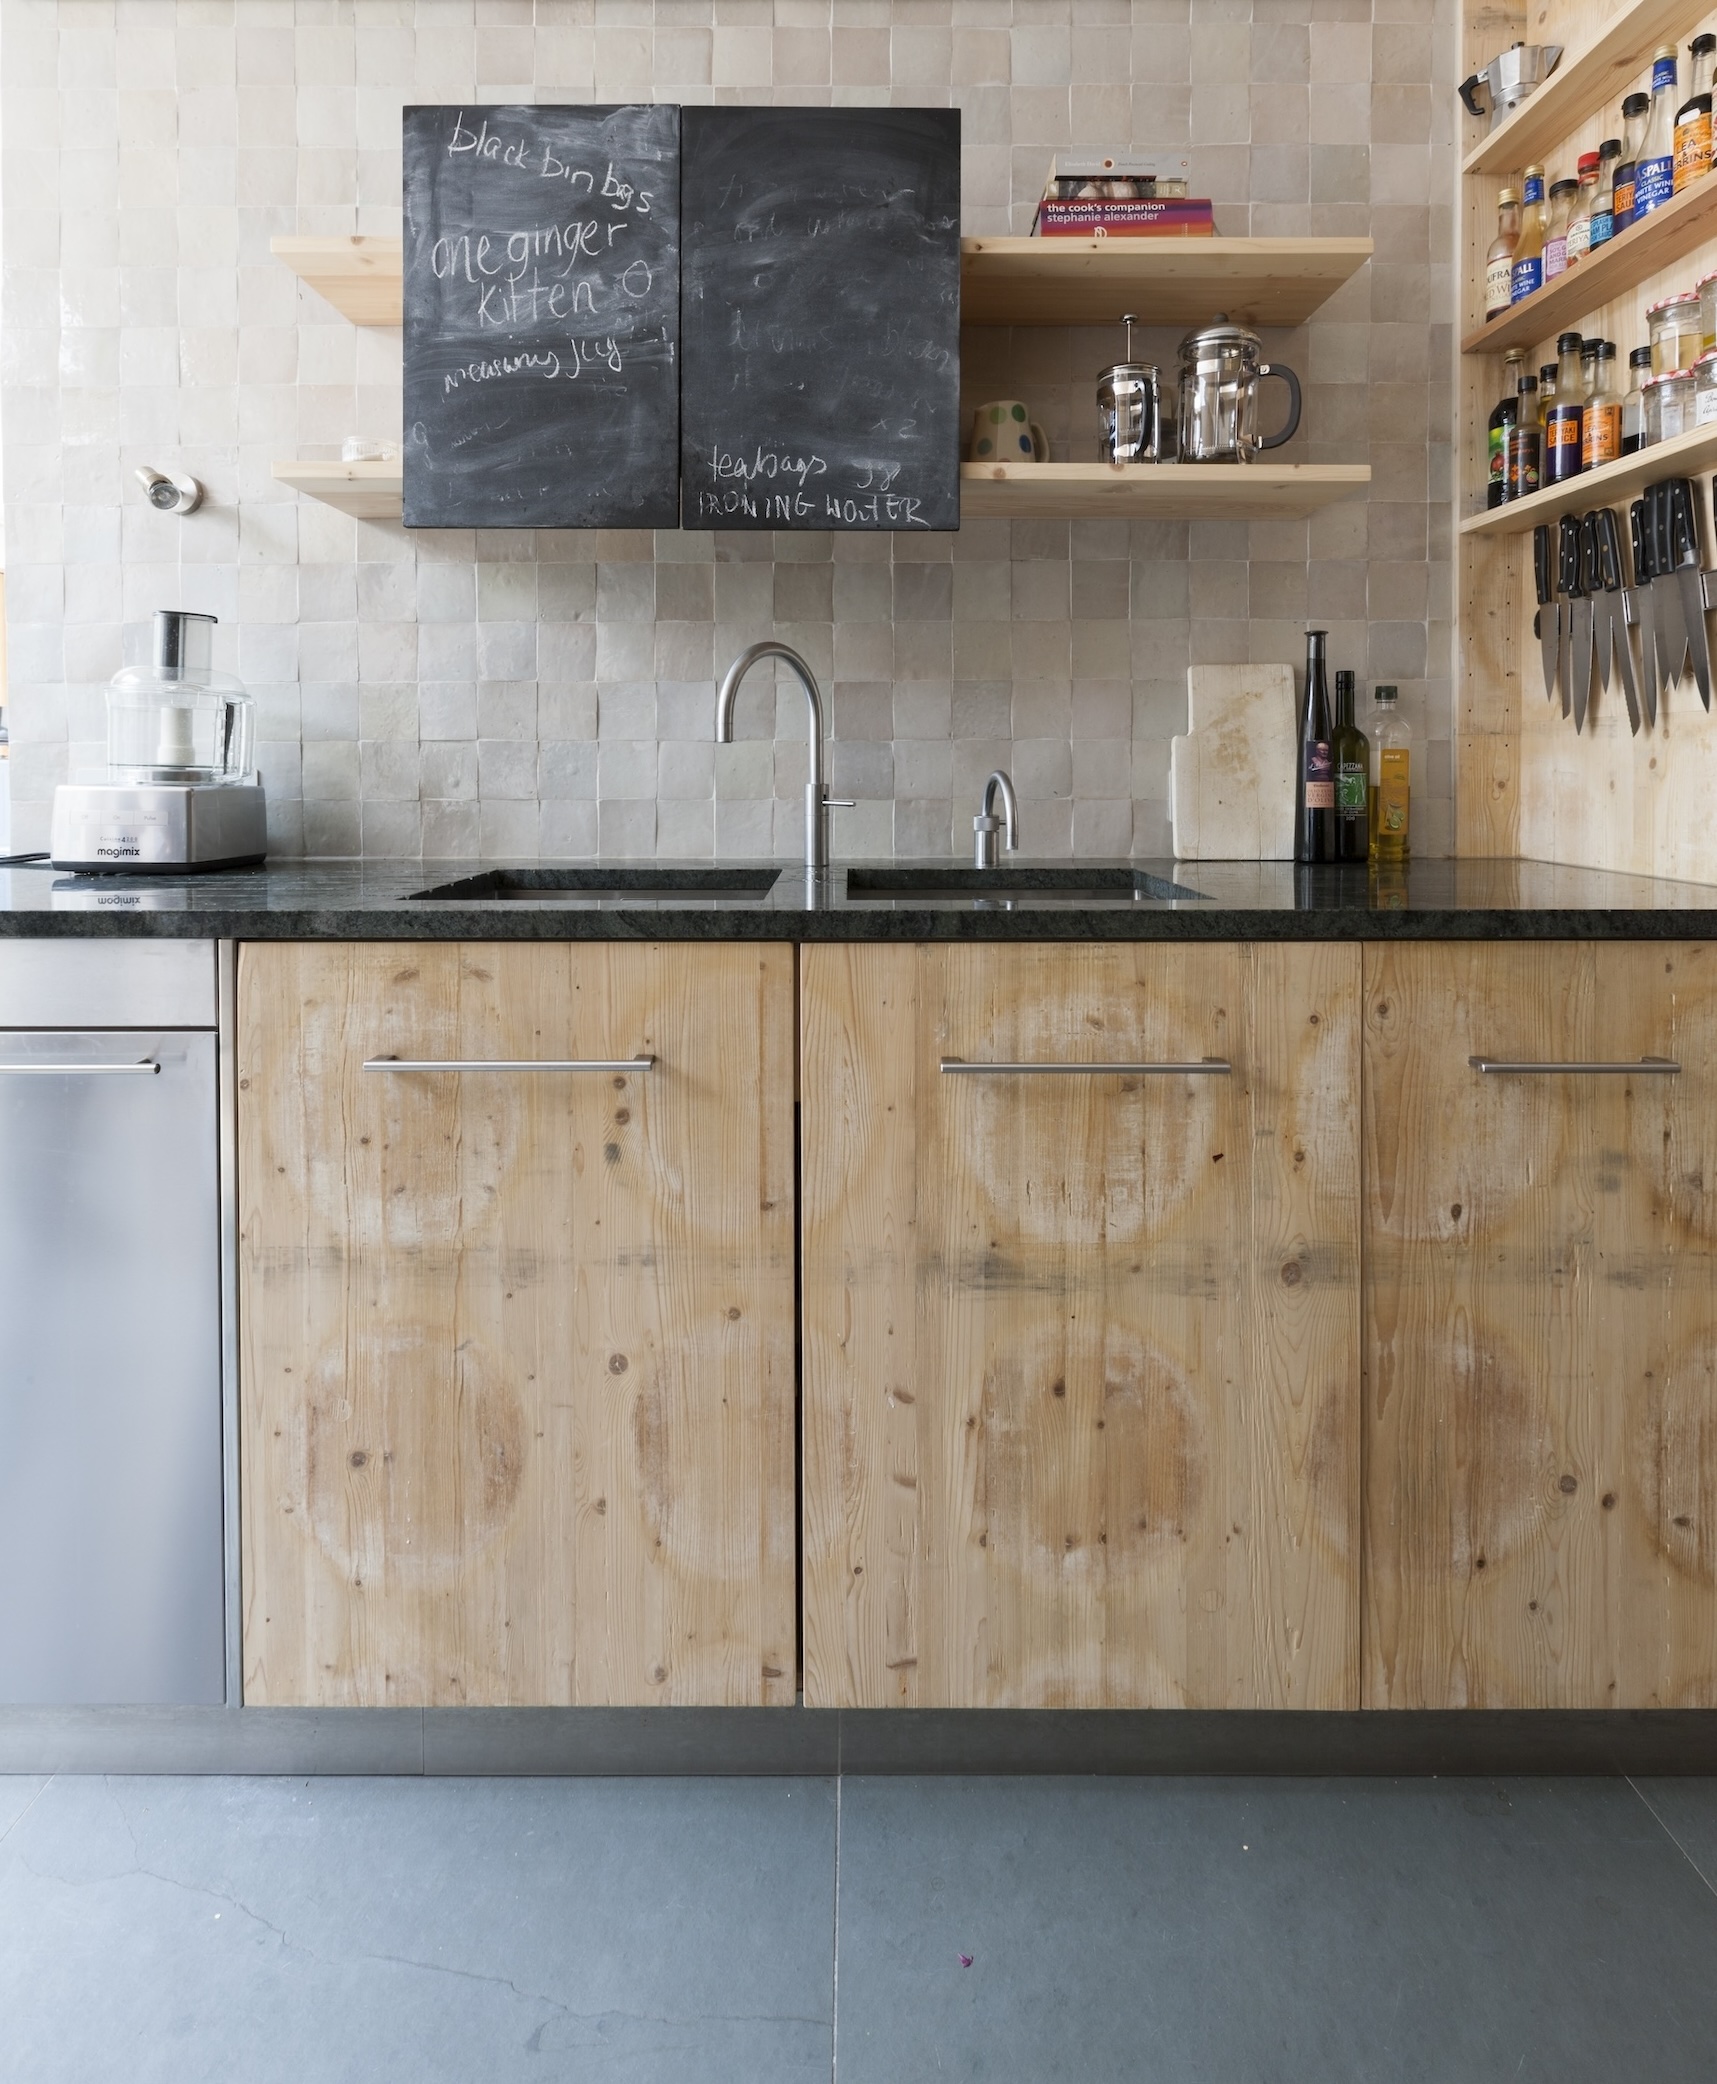 retrouvius kitchen from salvaged materials in north london. tom fallon photo. 229